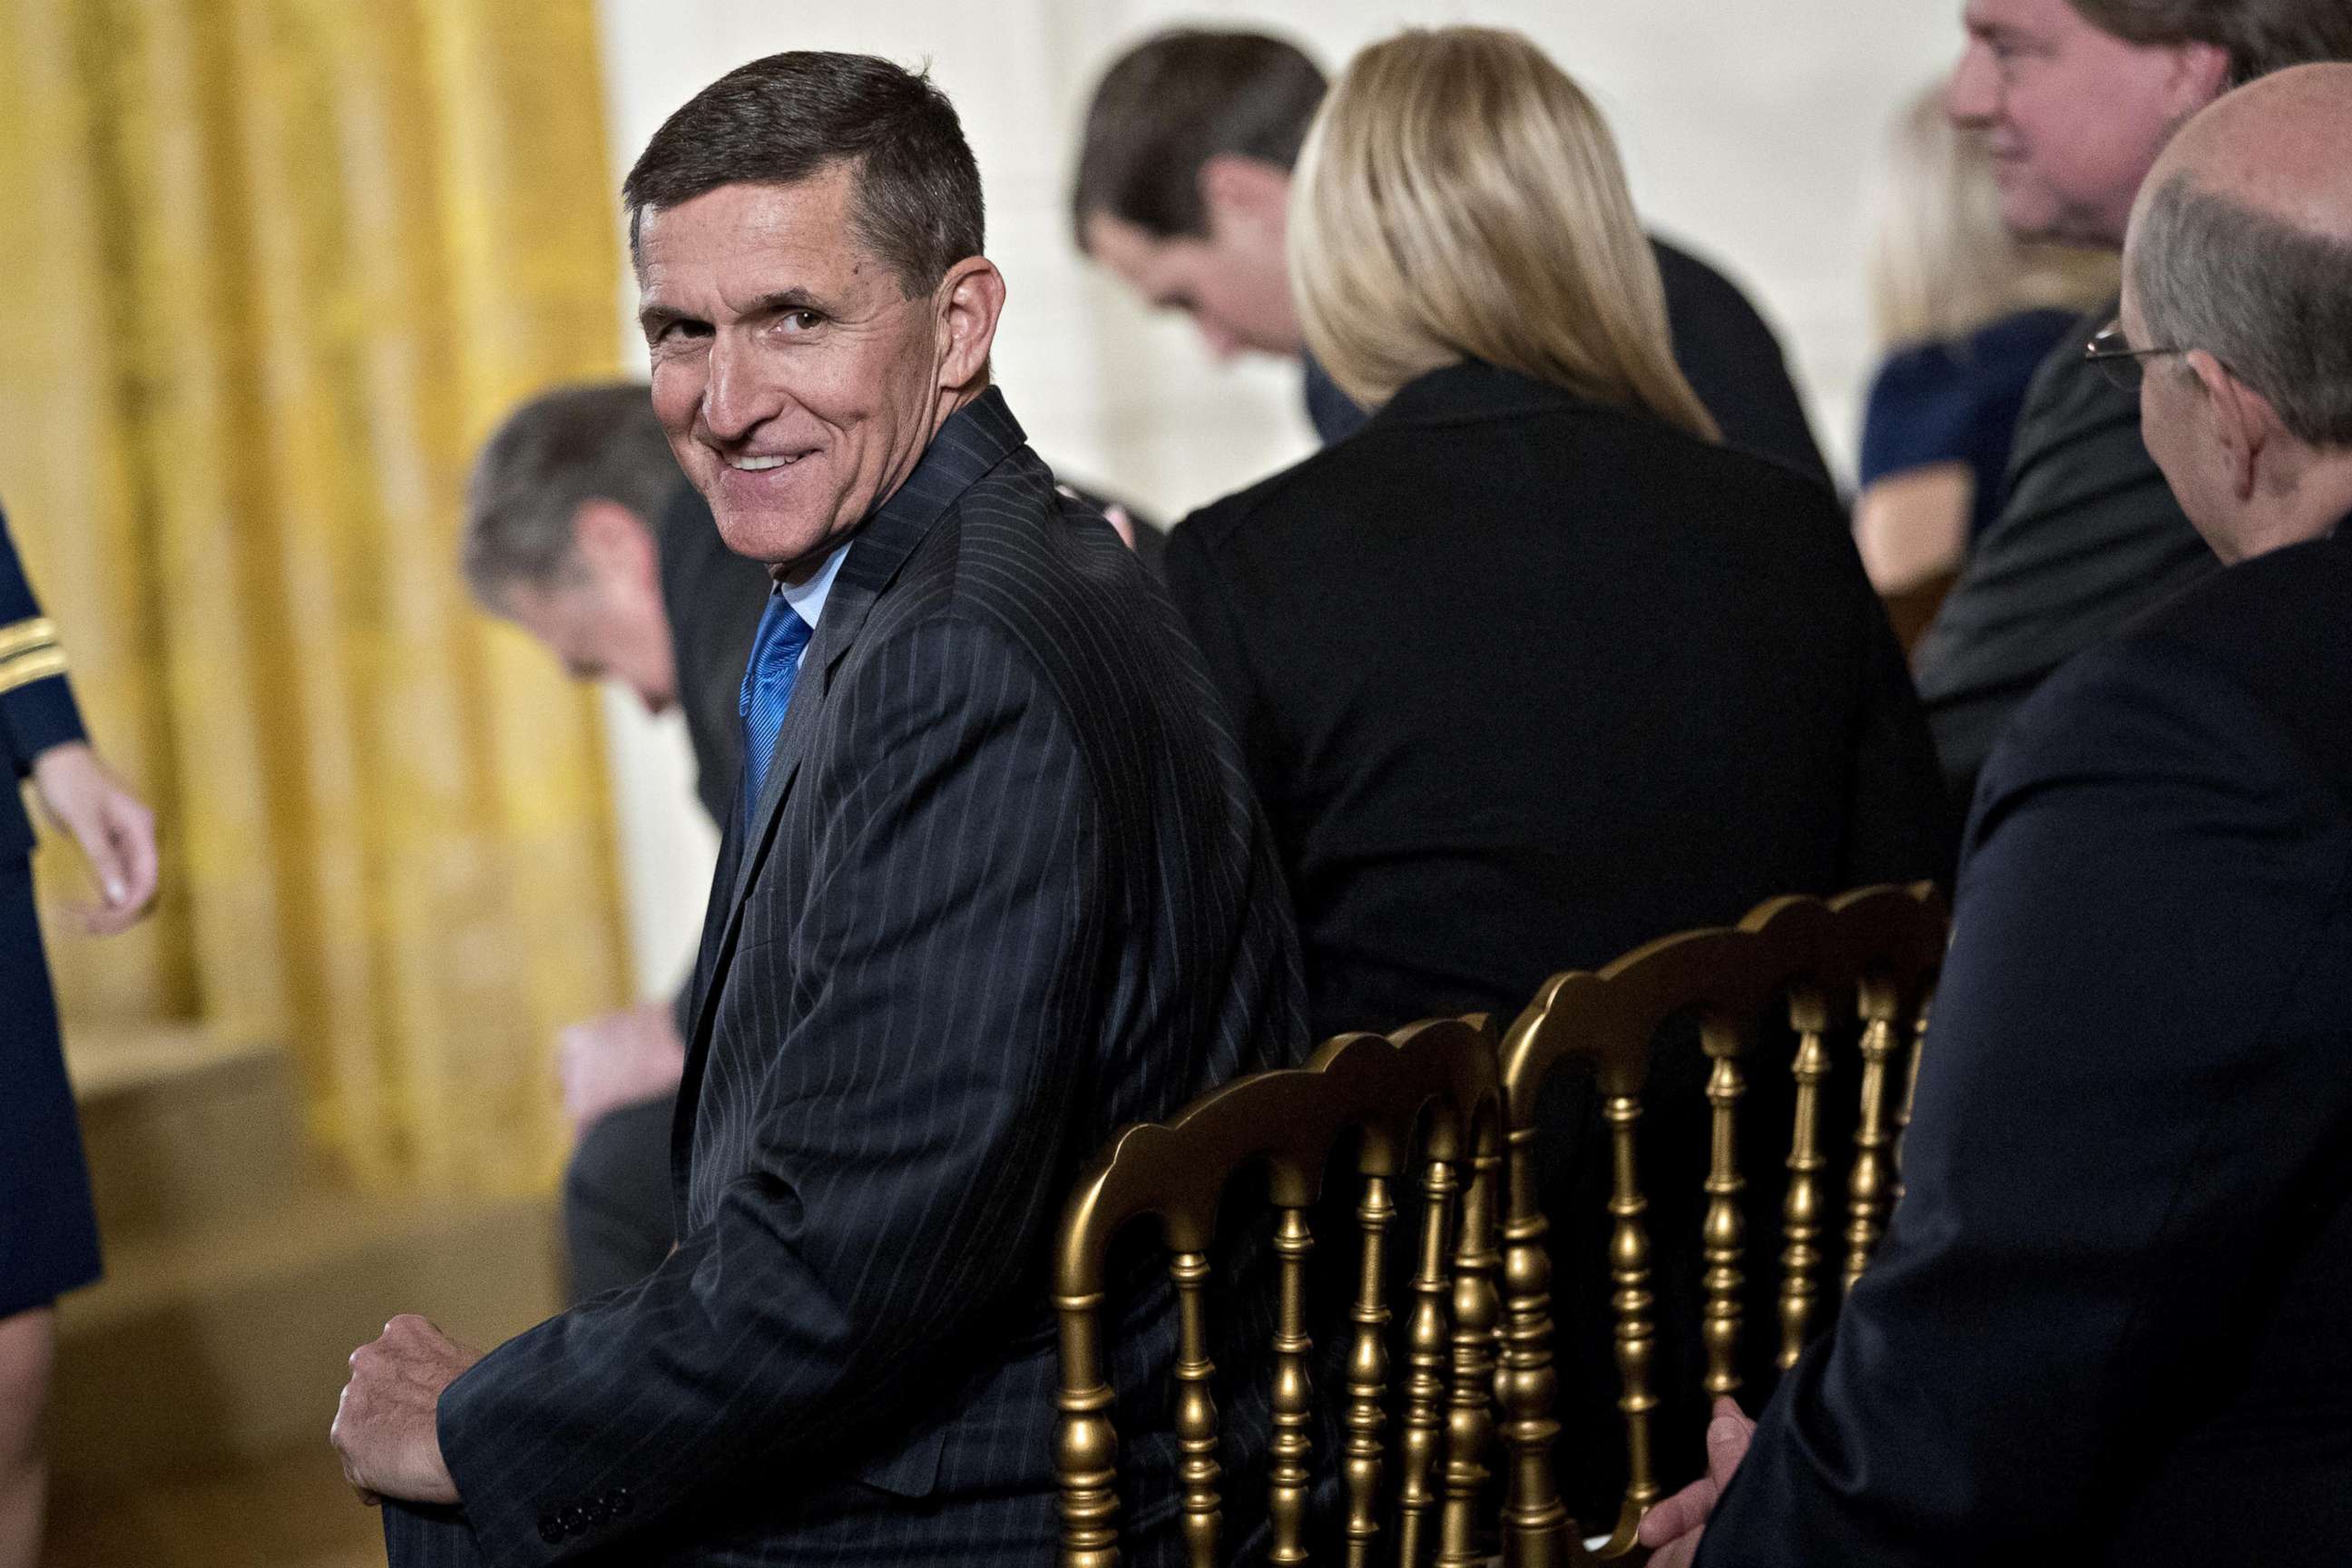 PHOTO: In this Jan. 22, 2017, file photo, retired Lieutenant General Michael Flynn, U.S. national security advisor, attends a swearing in ceremony of White House senior staff in the East Room of the White House in Washington, D.C.